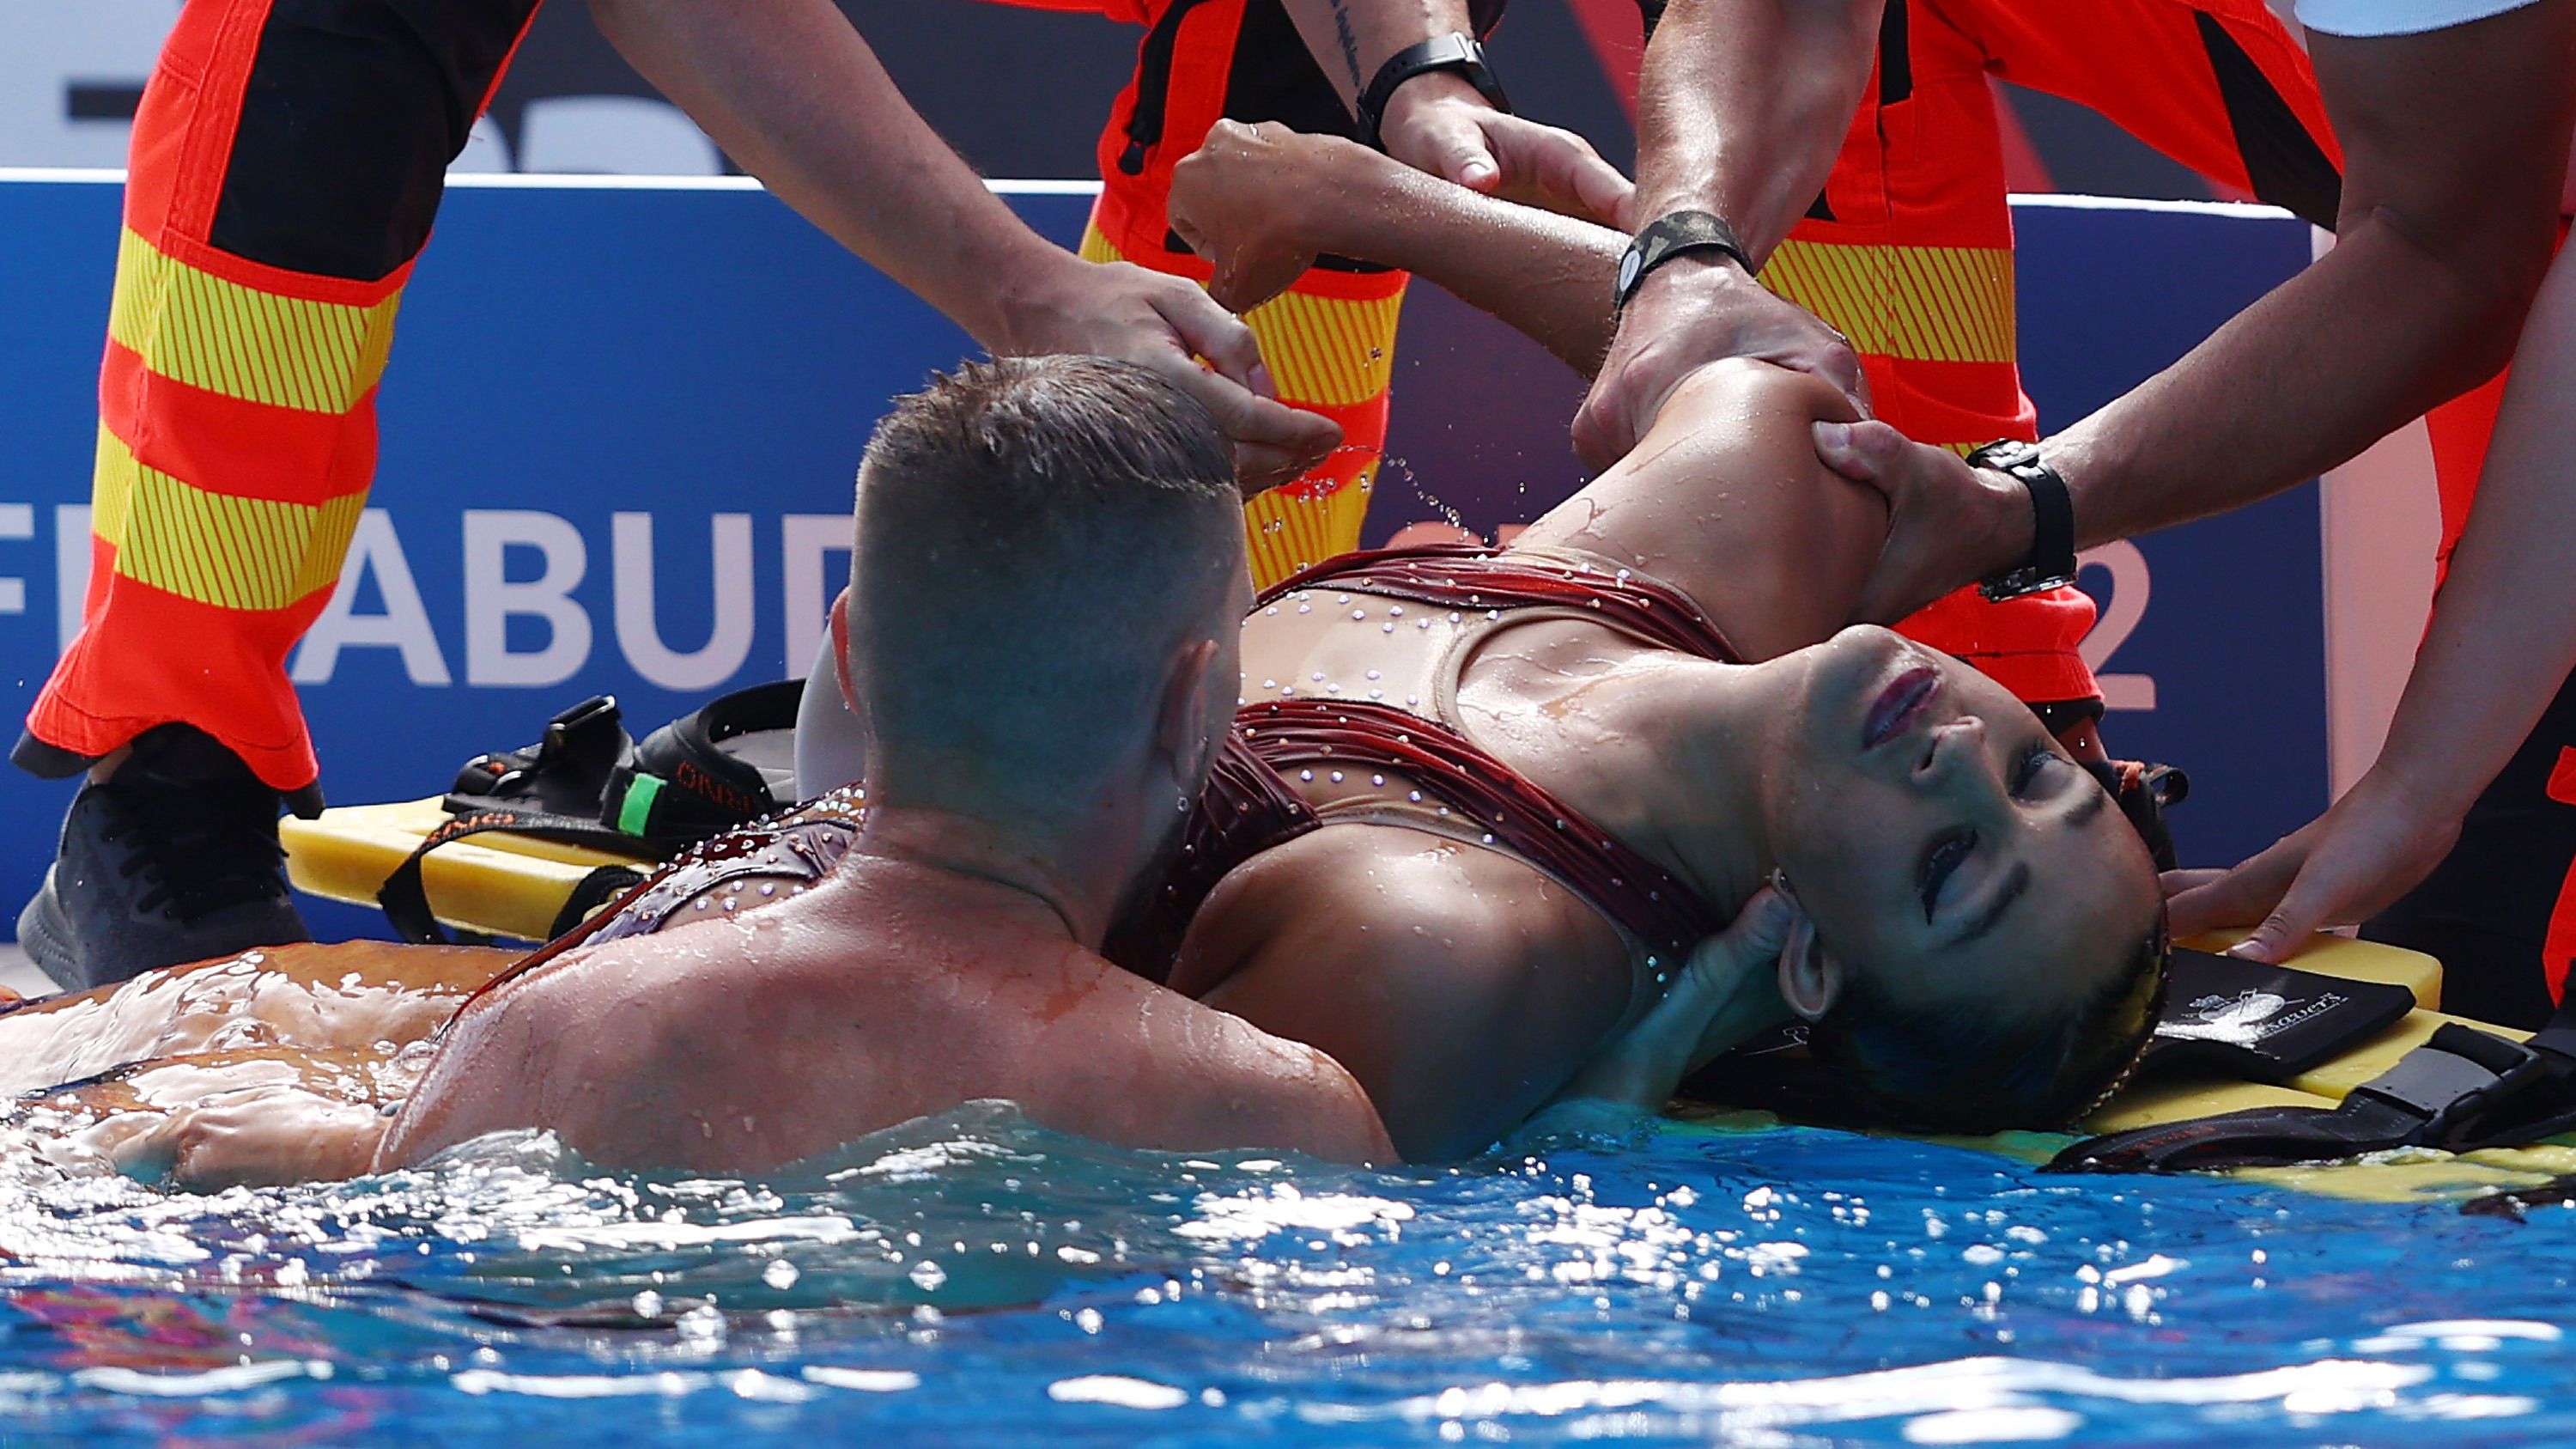 Coach rescues unconscious swimmer at World Champs